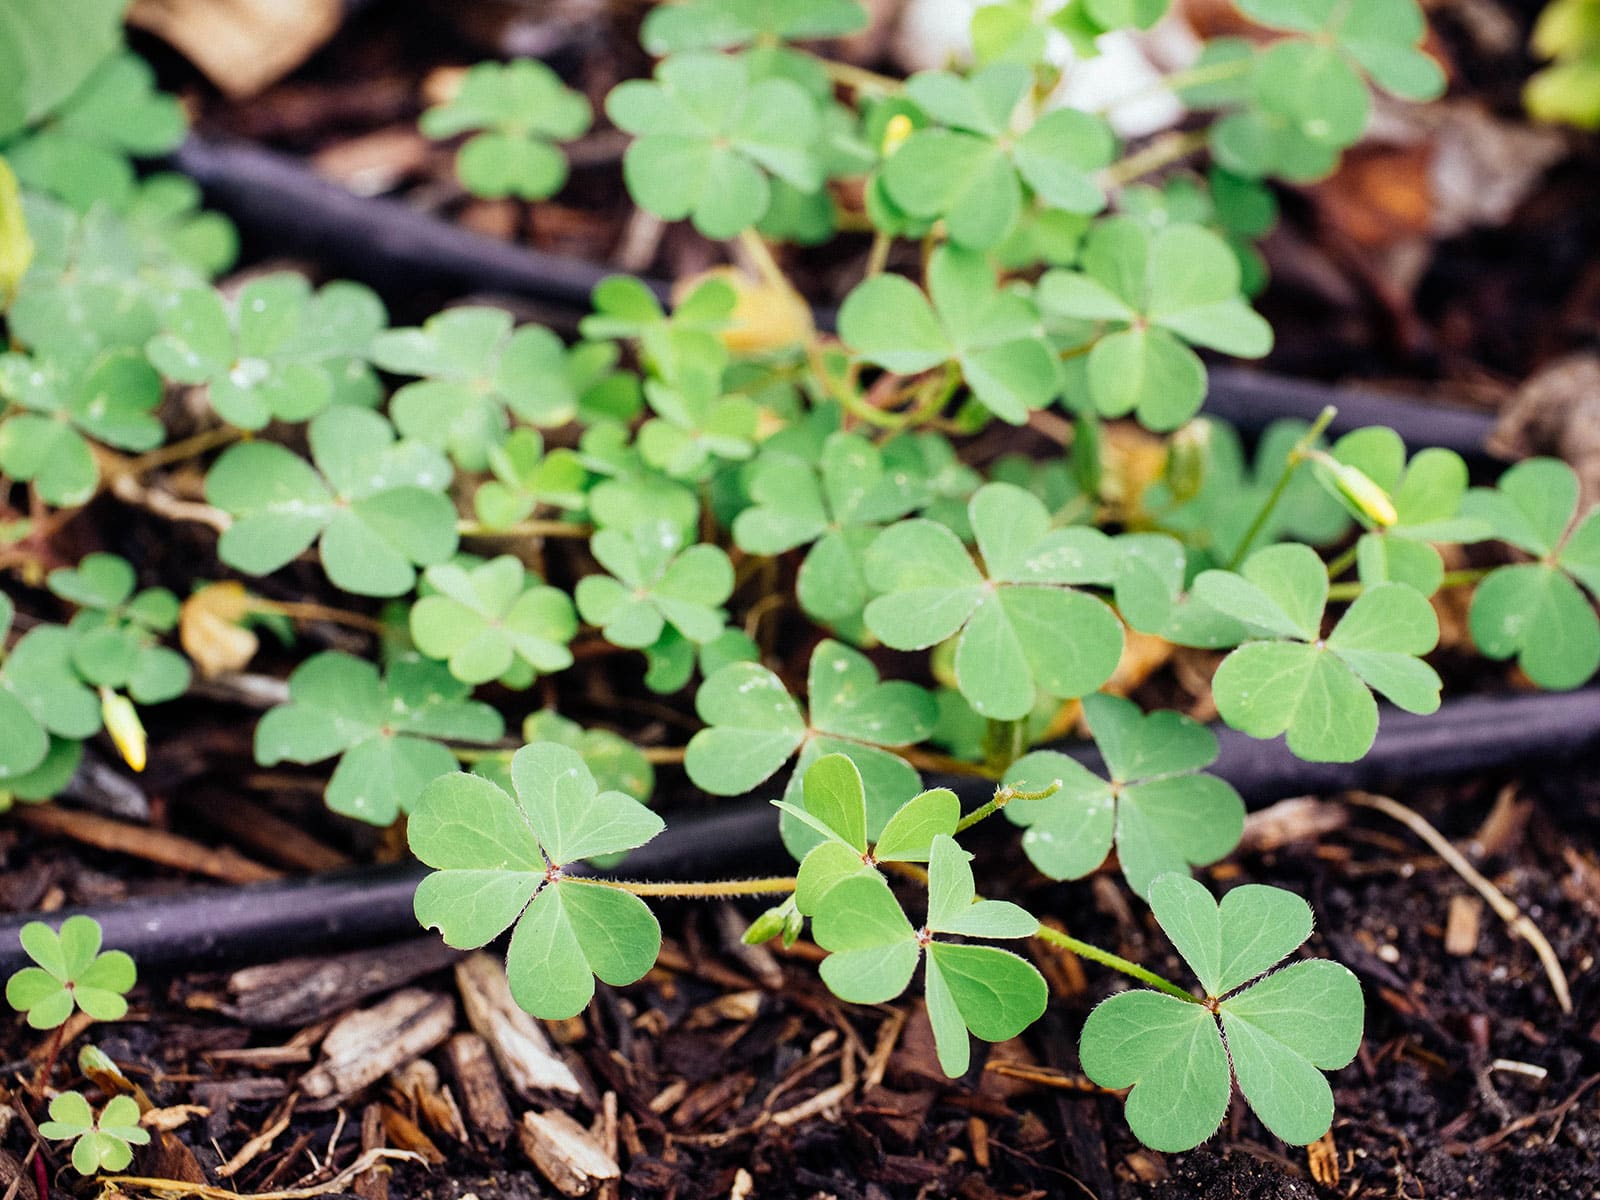 Wood sorrel growing in a mulched garden bed